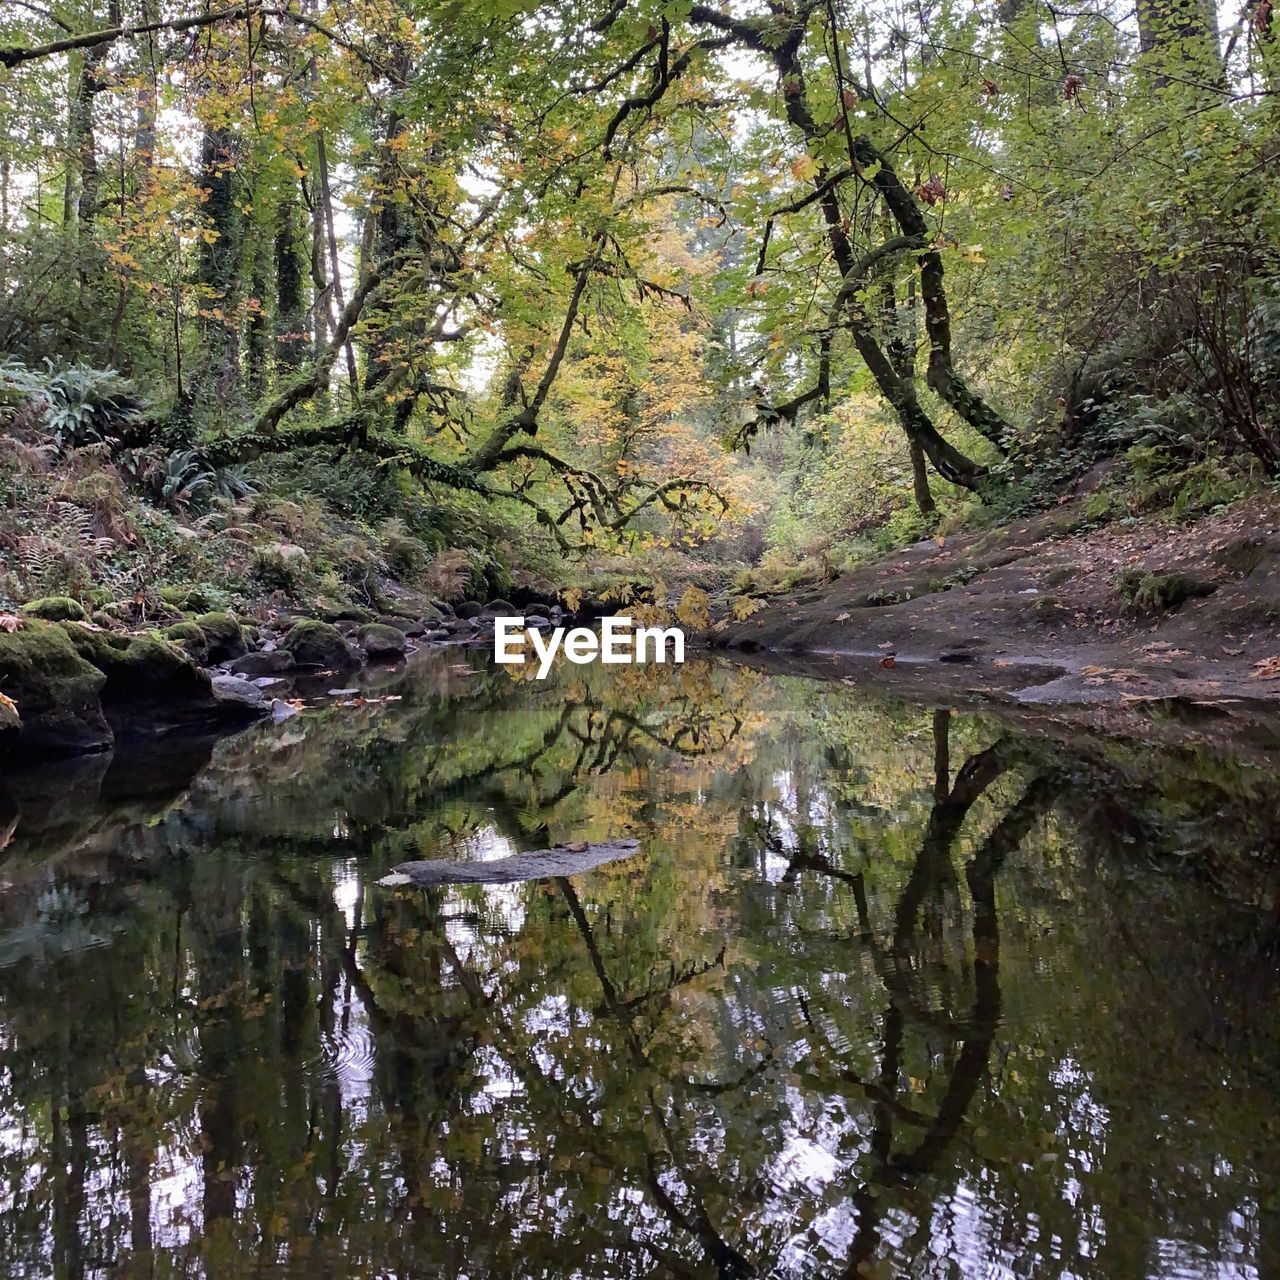 REFLECTION OF TREES ON WATER IN FOREST